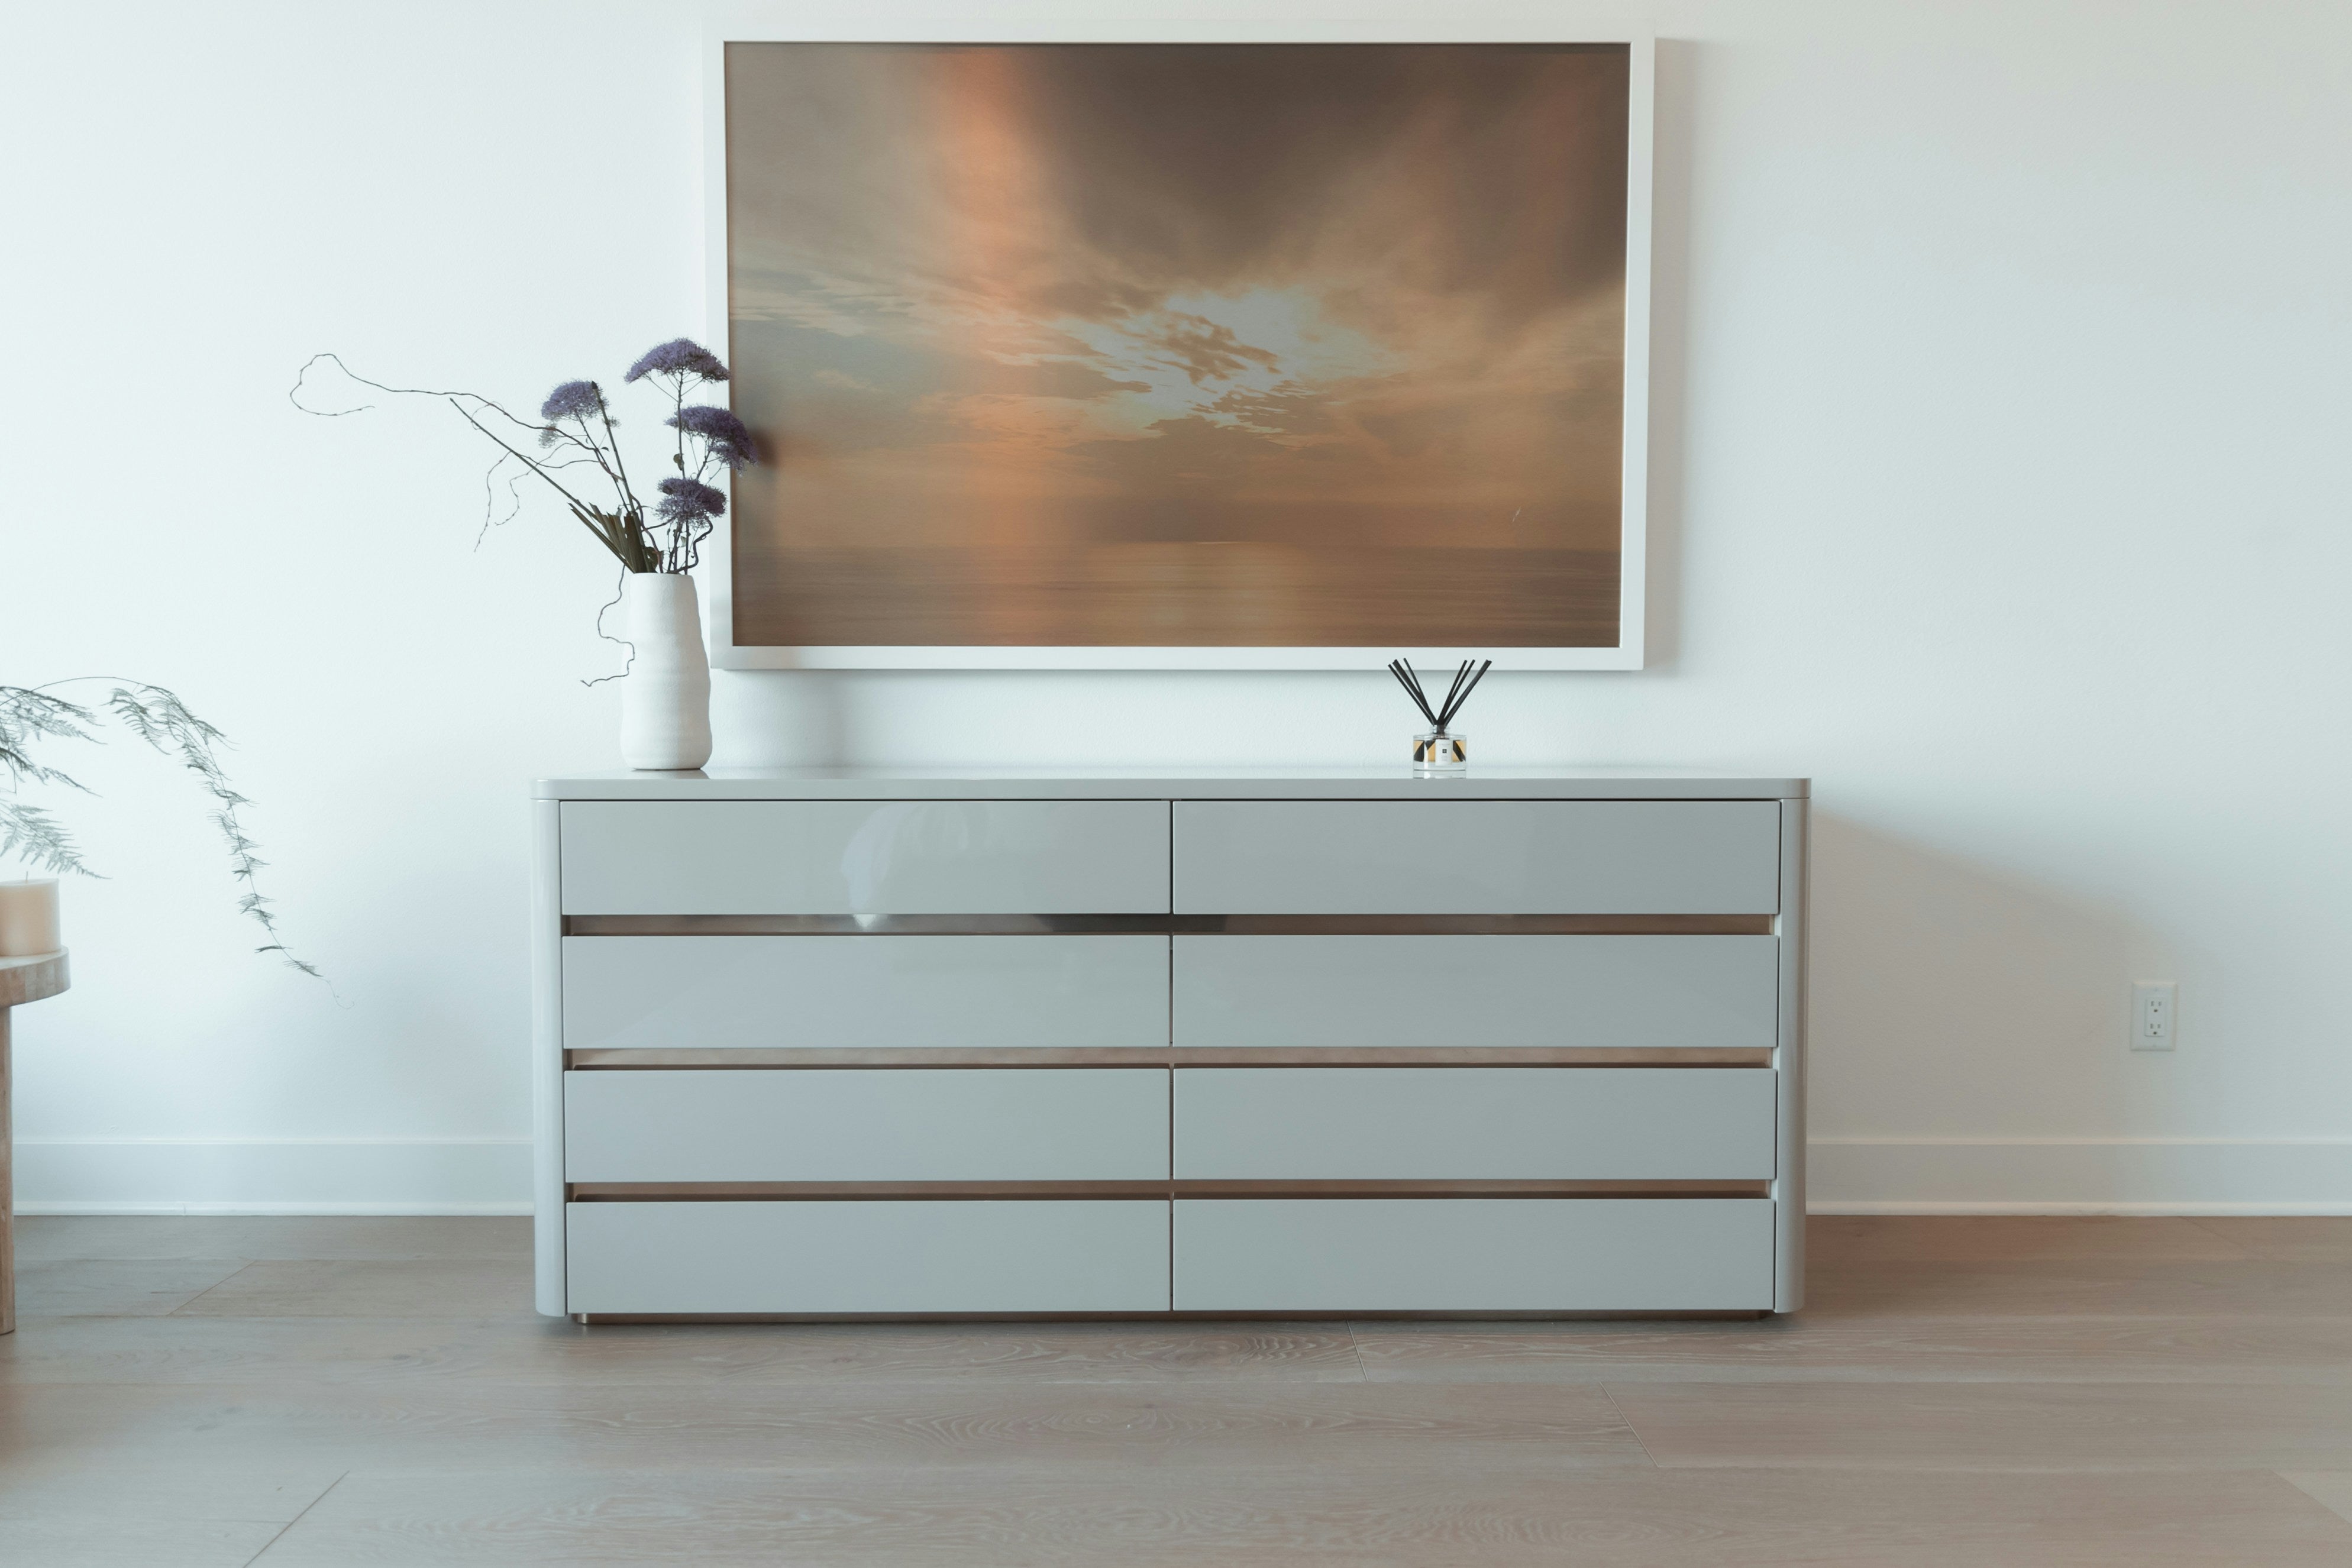 How to Select a Contemporary Dresser for a Sleek Bedroom Look